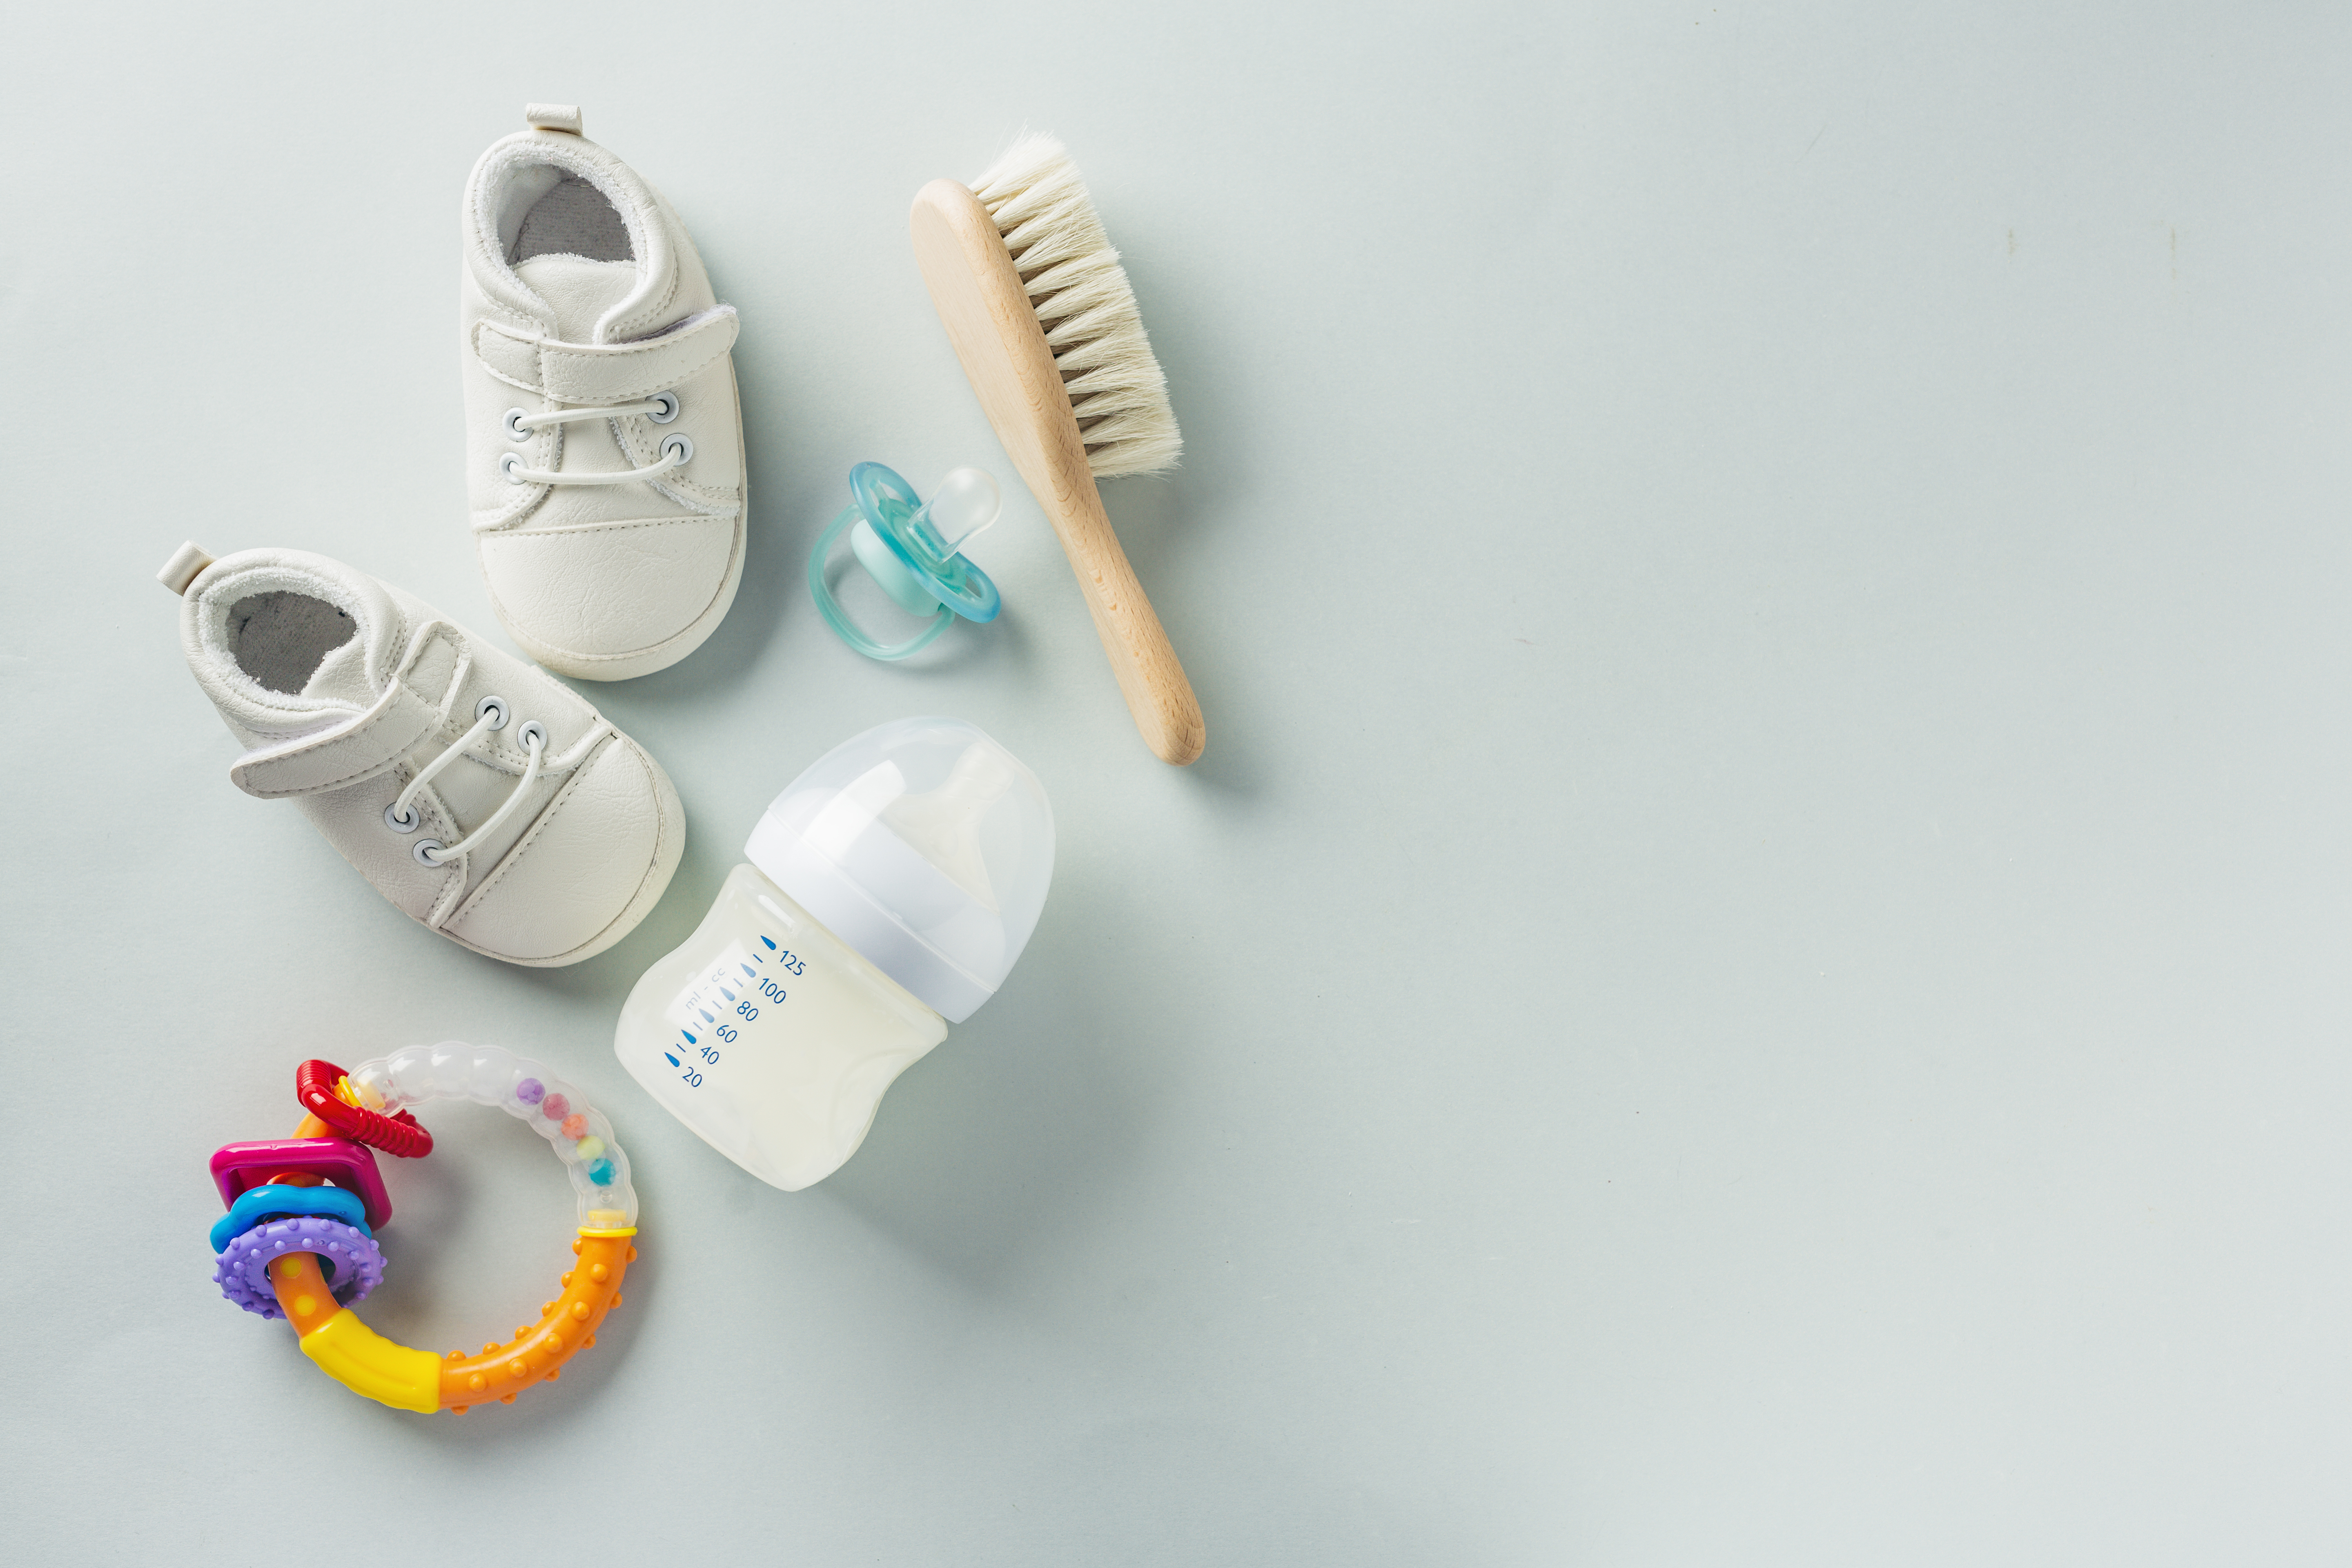 For the little ones - Baby products